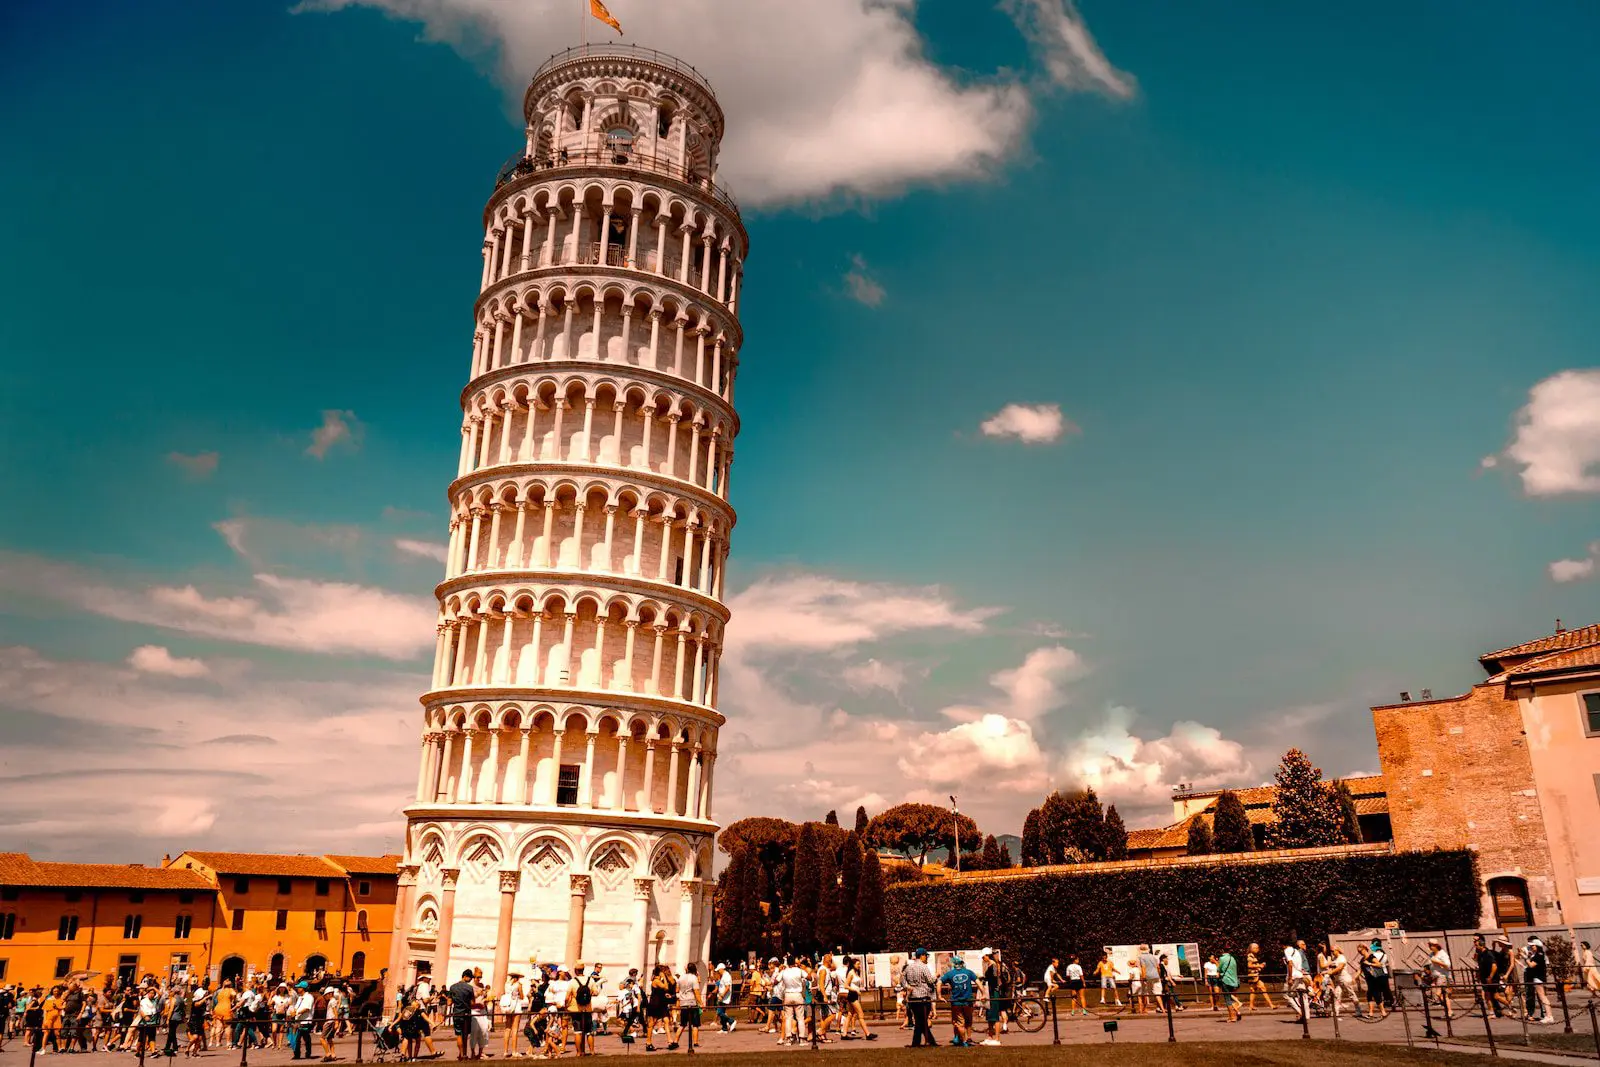 Leaning Tower of Pisa, Rome, Italy